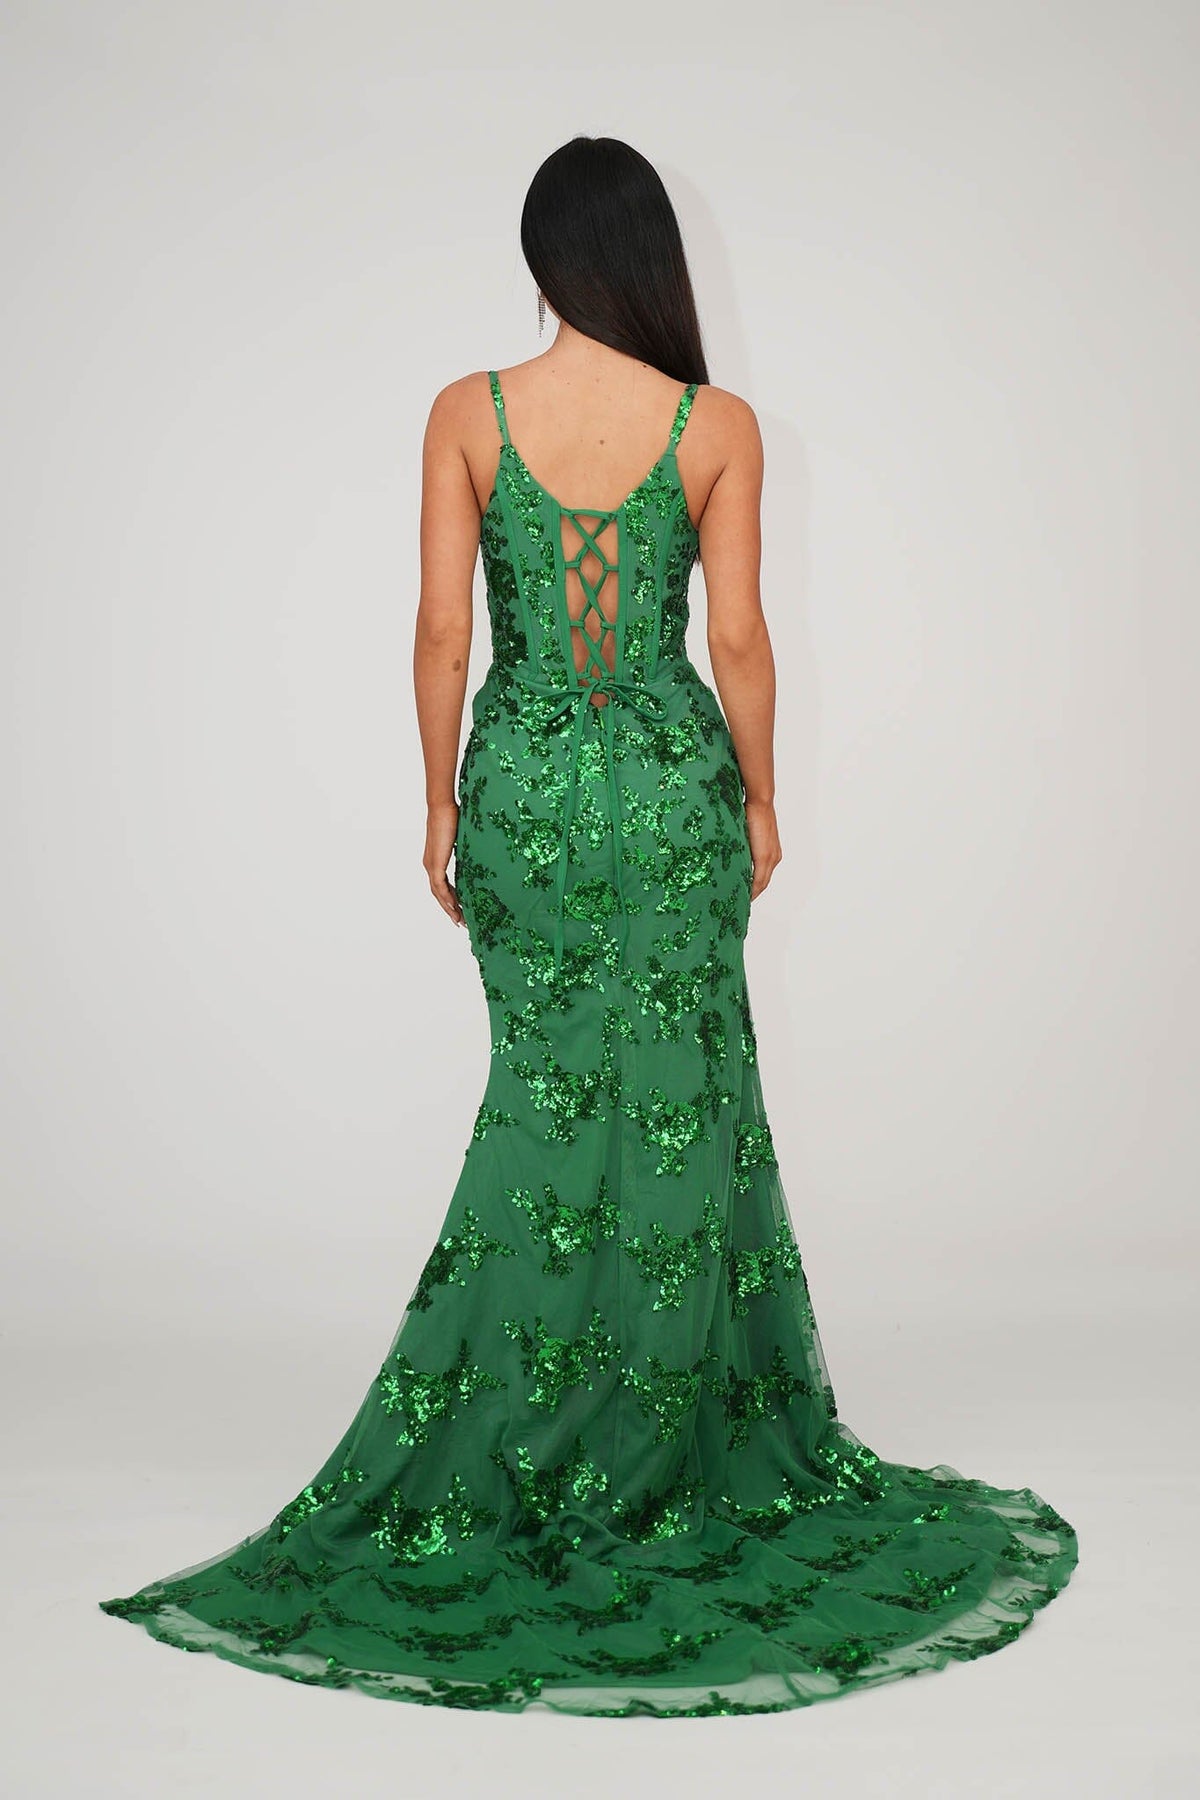 Lace Up Open Back of Bright Green Floral Embellished Sequins Floor Length Evening Gown with Corset Bodice, Mesh Insert and Side Slit